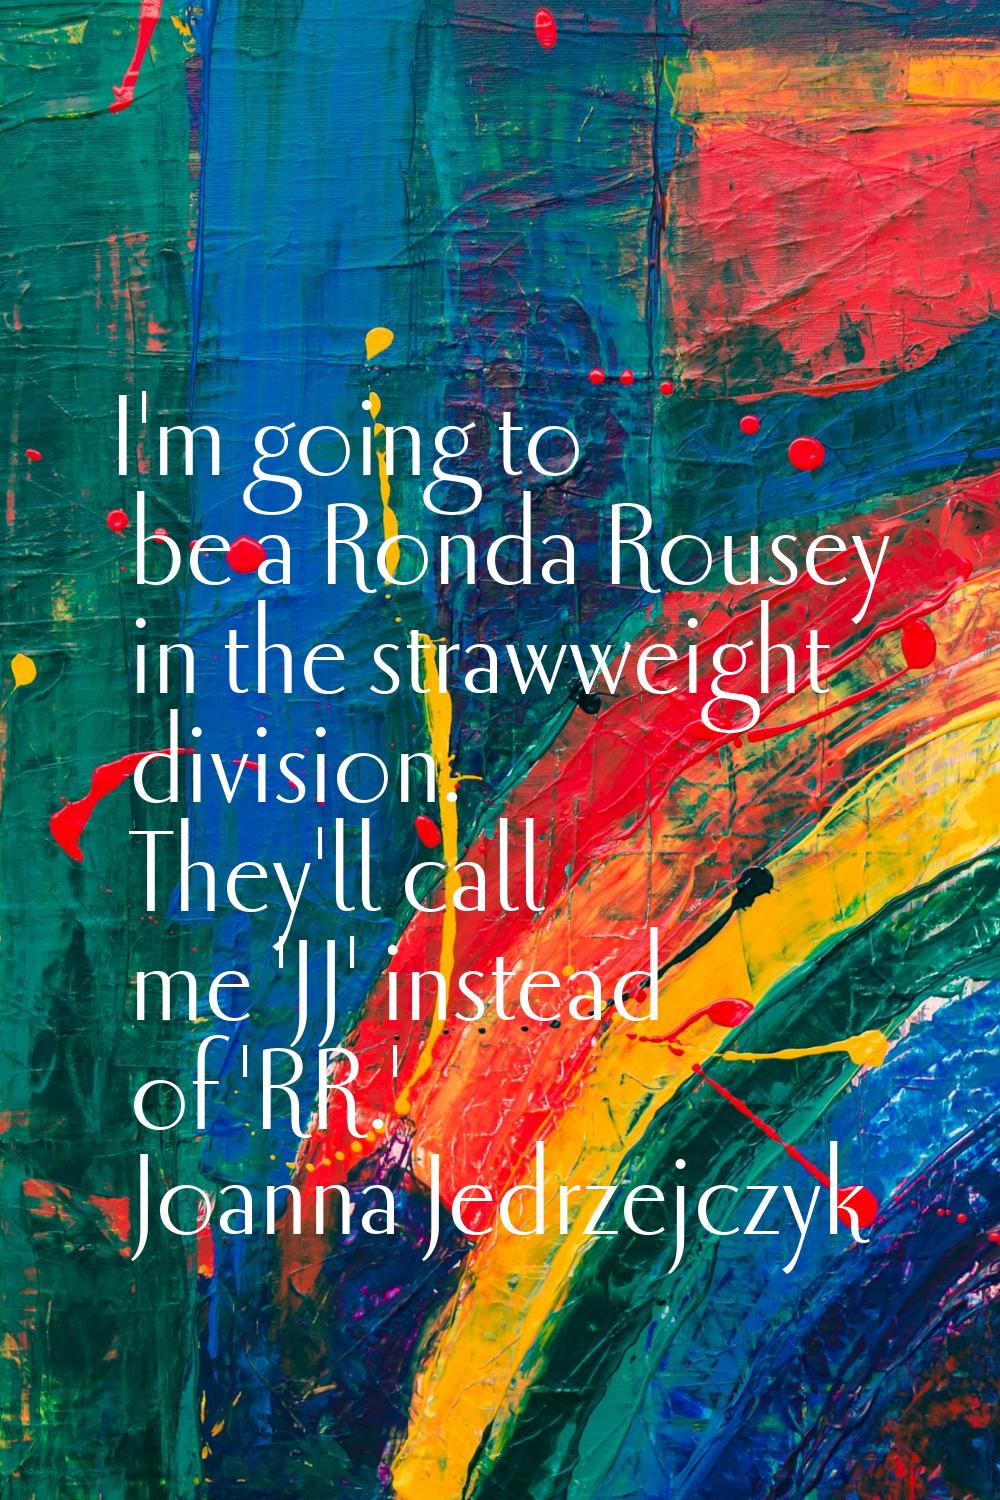 I'm going to be a Ronda Rousey in the strawweight division. They'll call me 'JJ' instead of 'RR.'